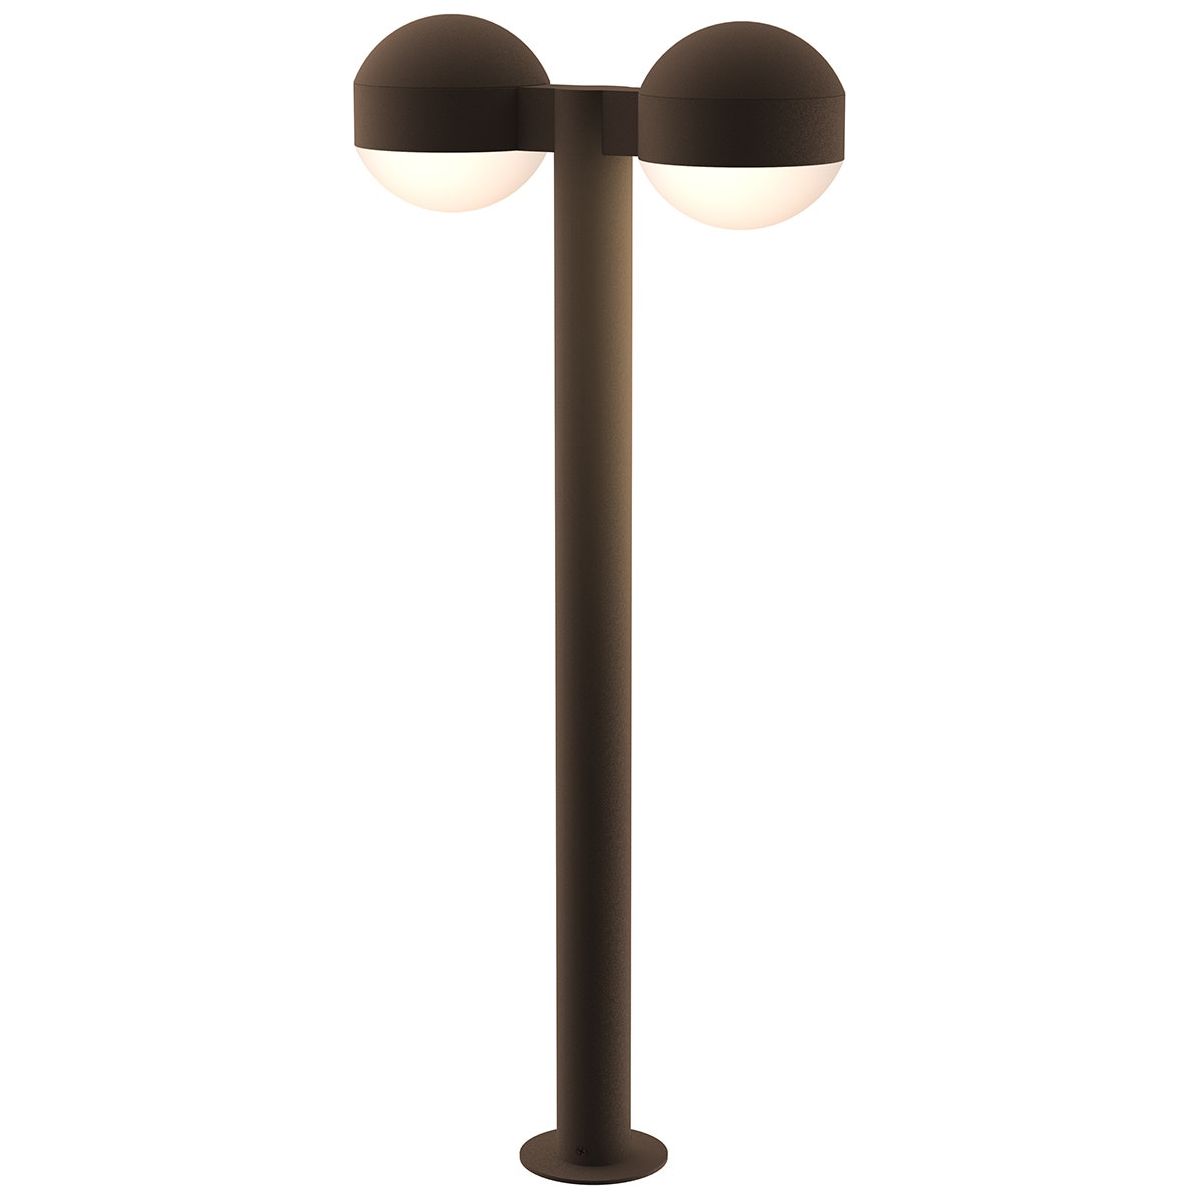 REALS 28" LED Double Bollard with Dome Cap and Dome Lens